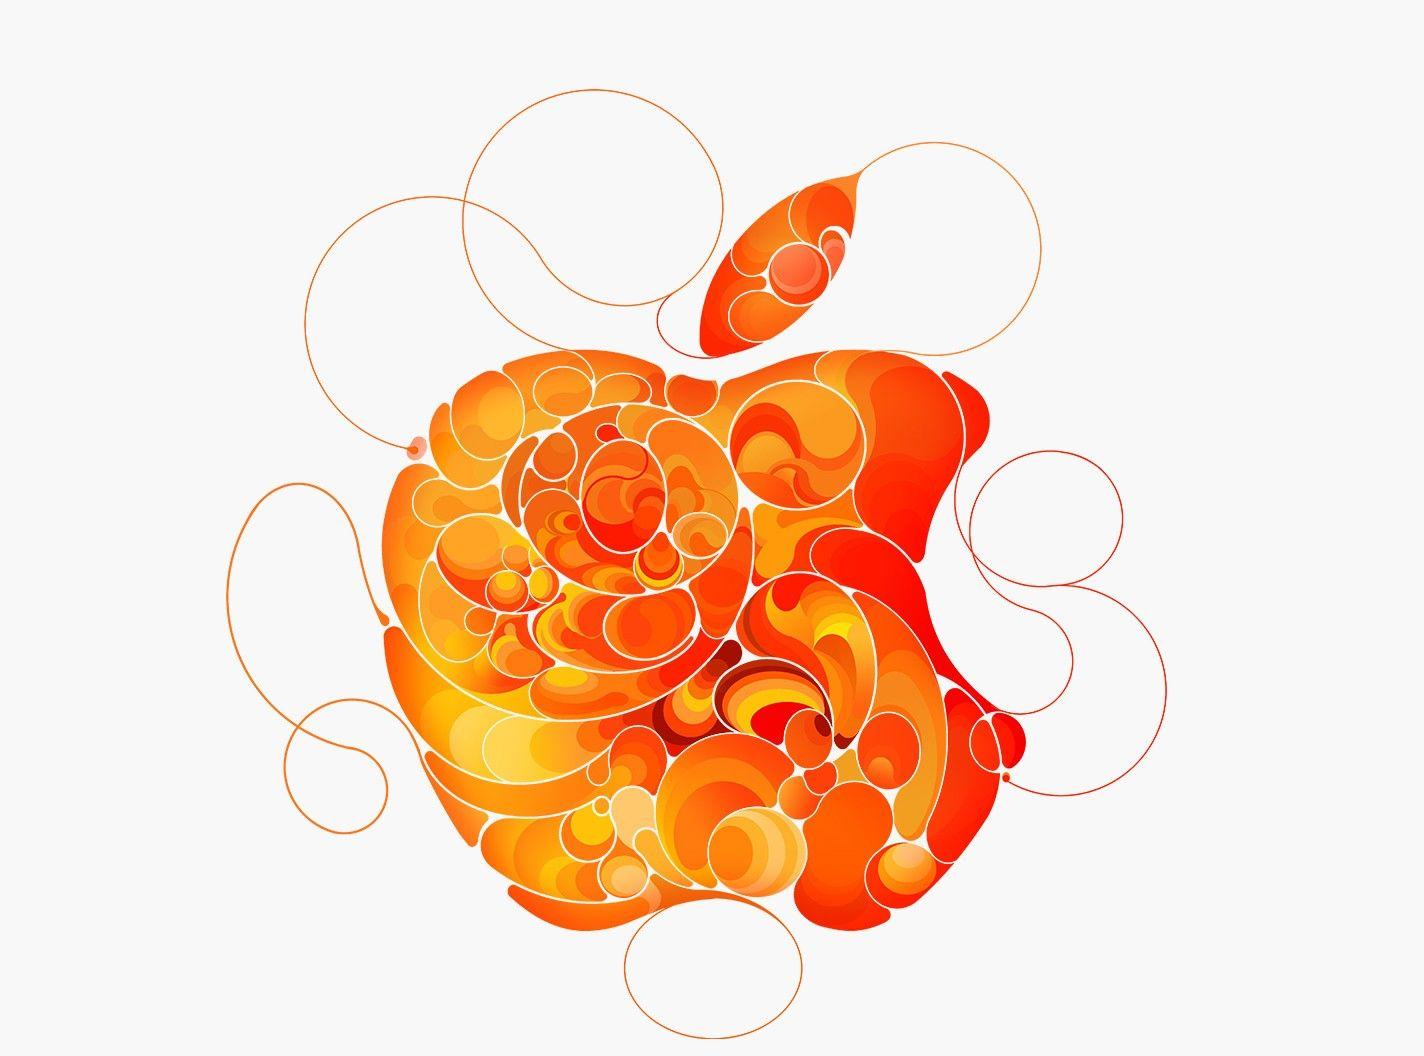 2018 Apple Logo - Apple October 2018 Event Preview: What's next for iPad Pro and Mac